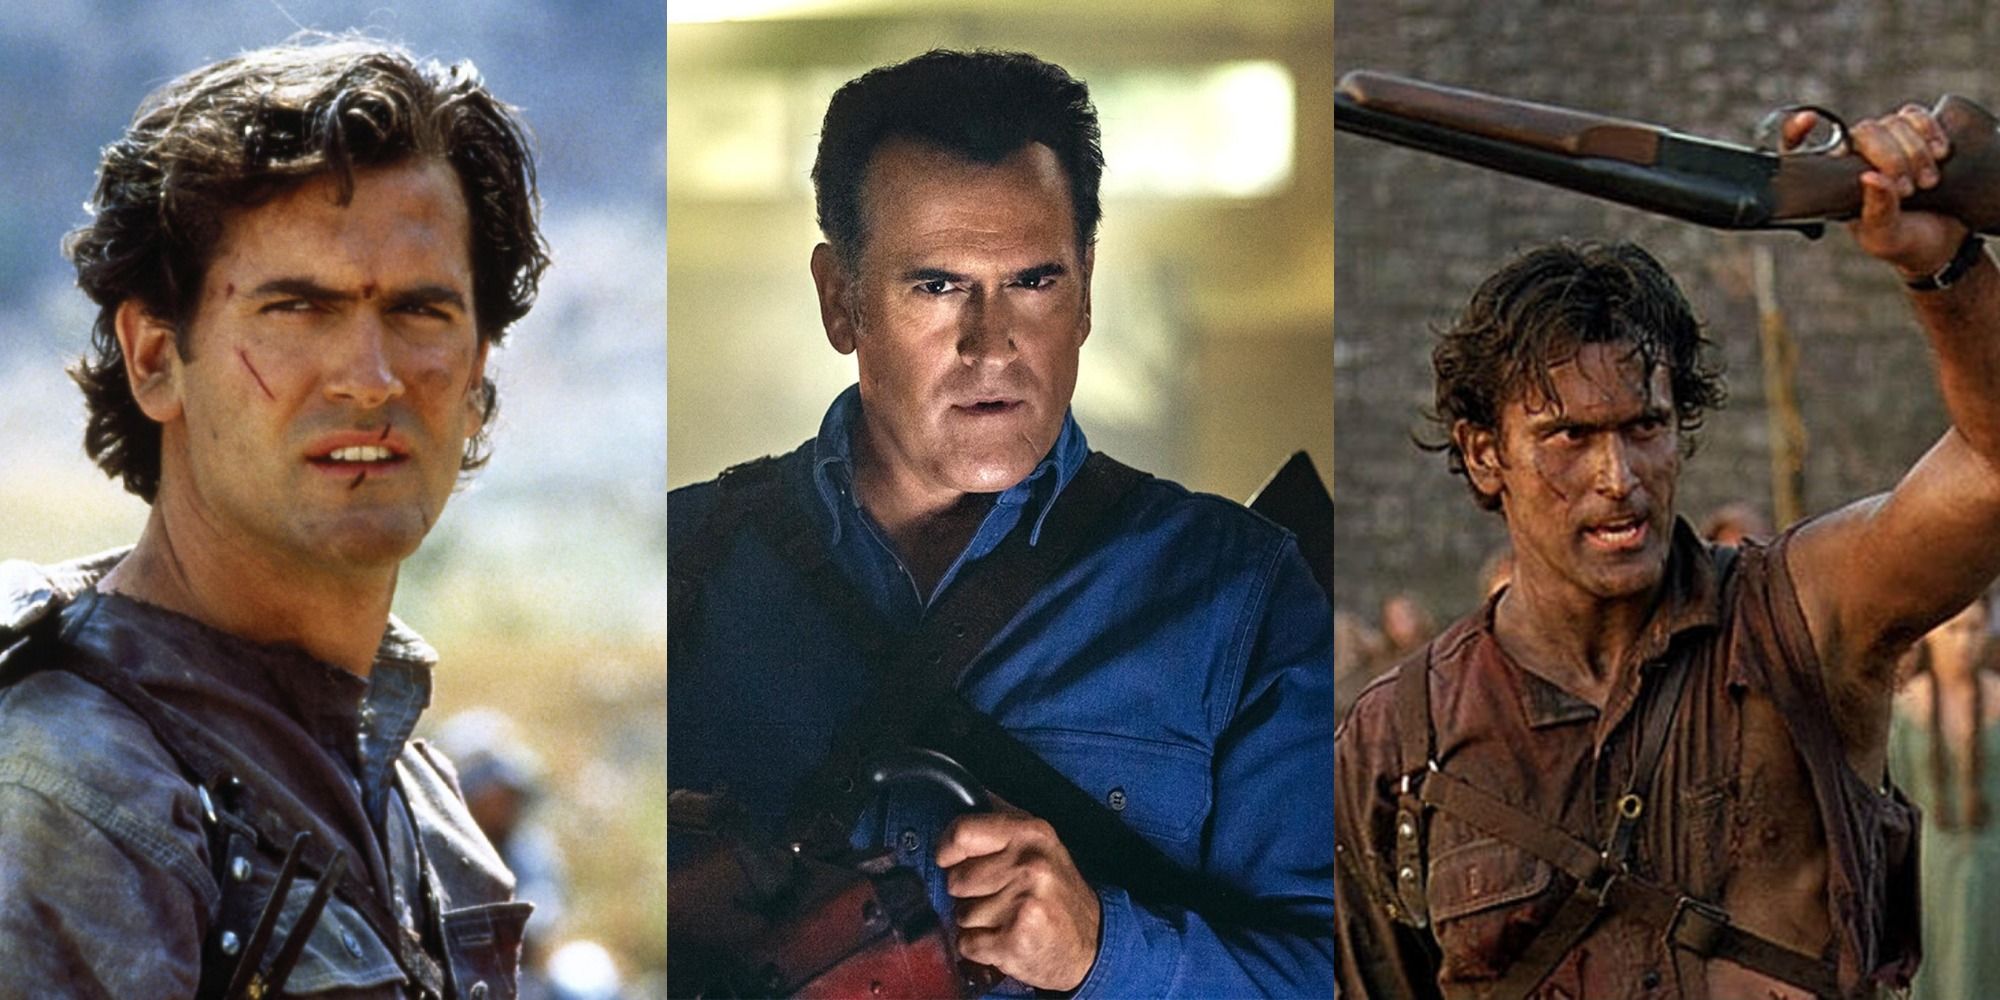 Grooviest Ash Quotes Featured Split Ash Williams from Army of Darkness and Ash VS Evil Dead